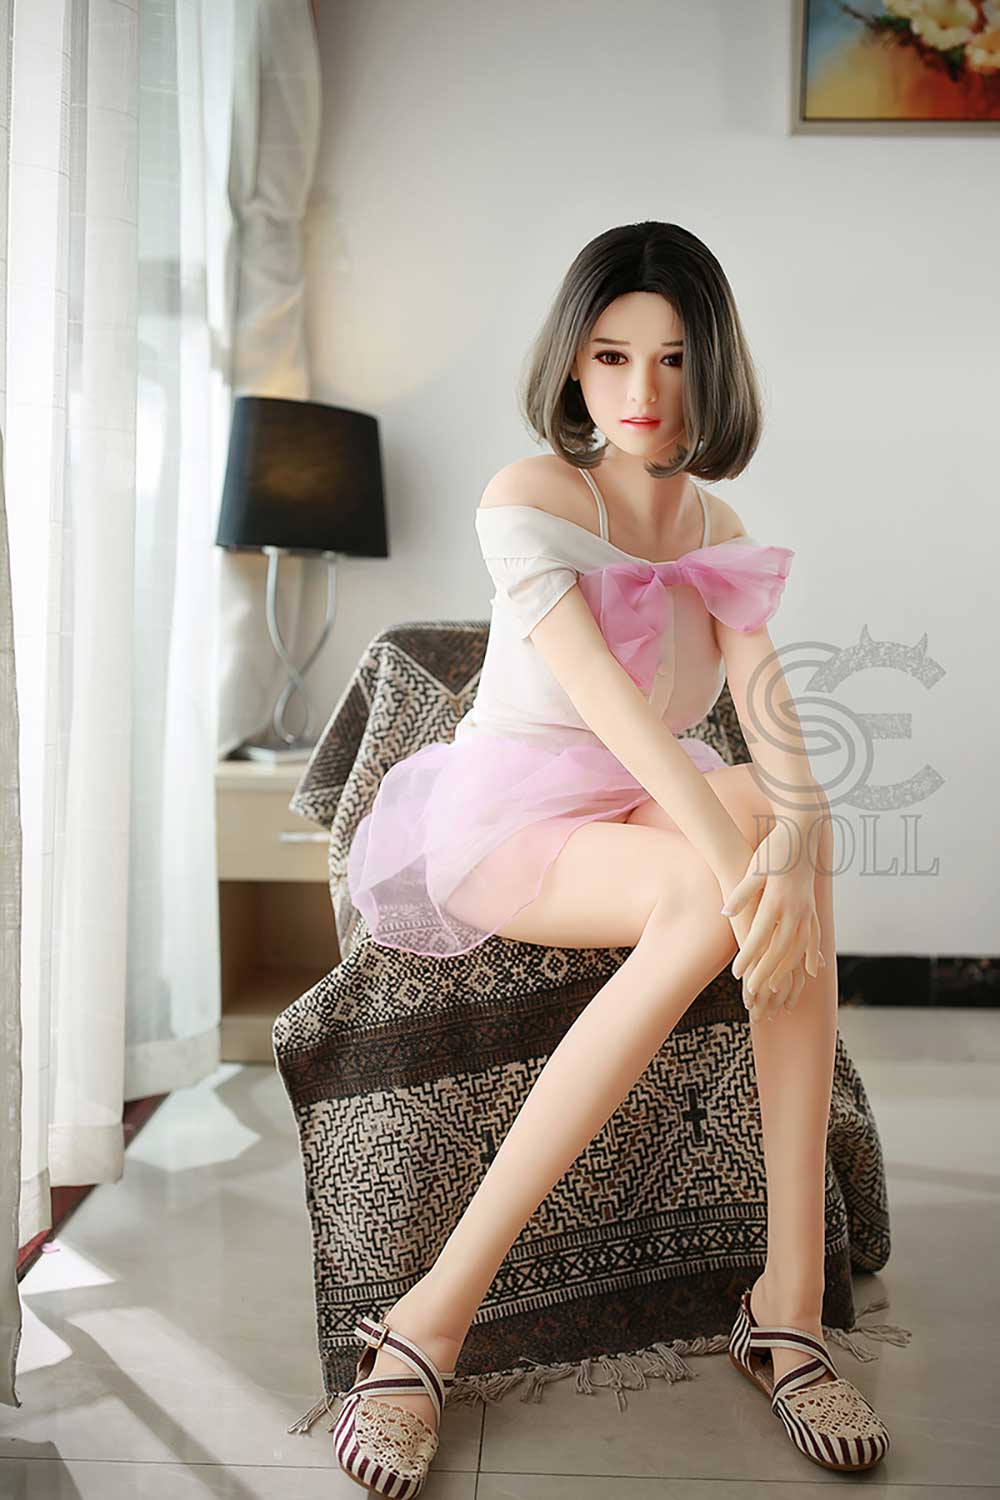 SEDOLL Gwendolyn, bambola sessuale in TPE con coppa D, 165 cm